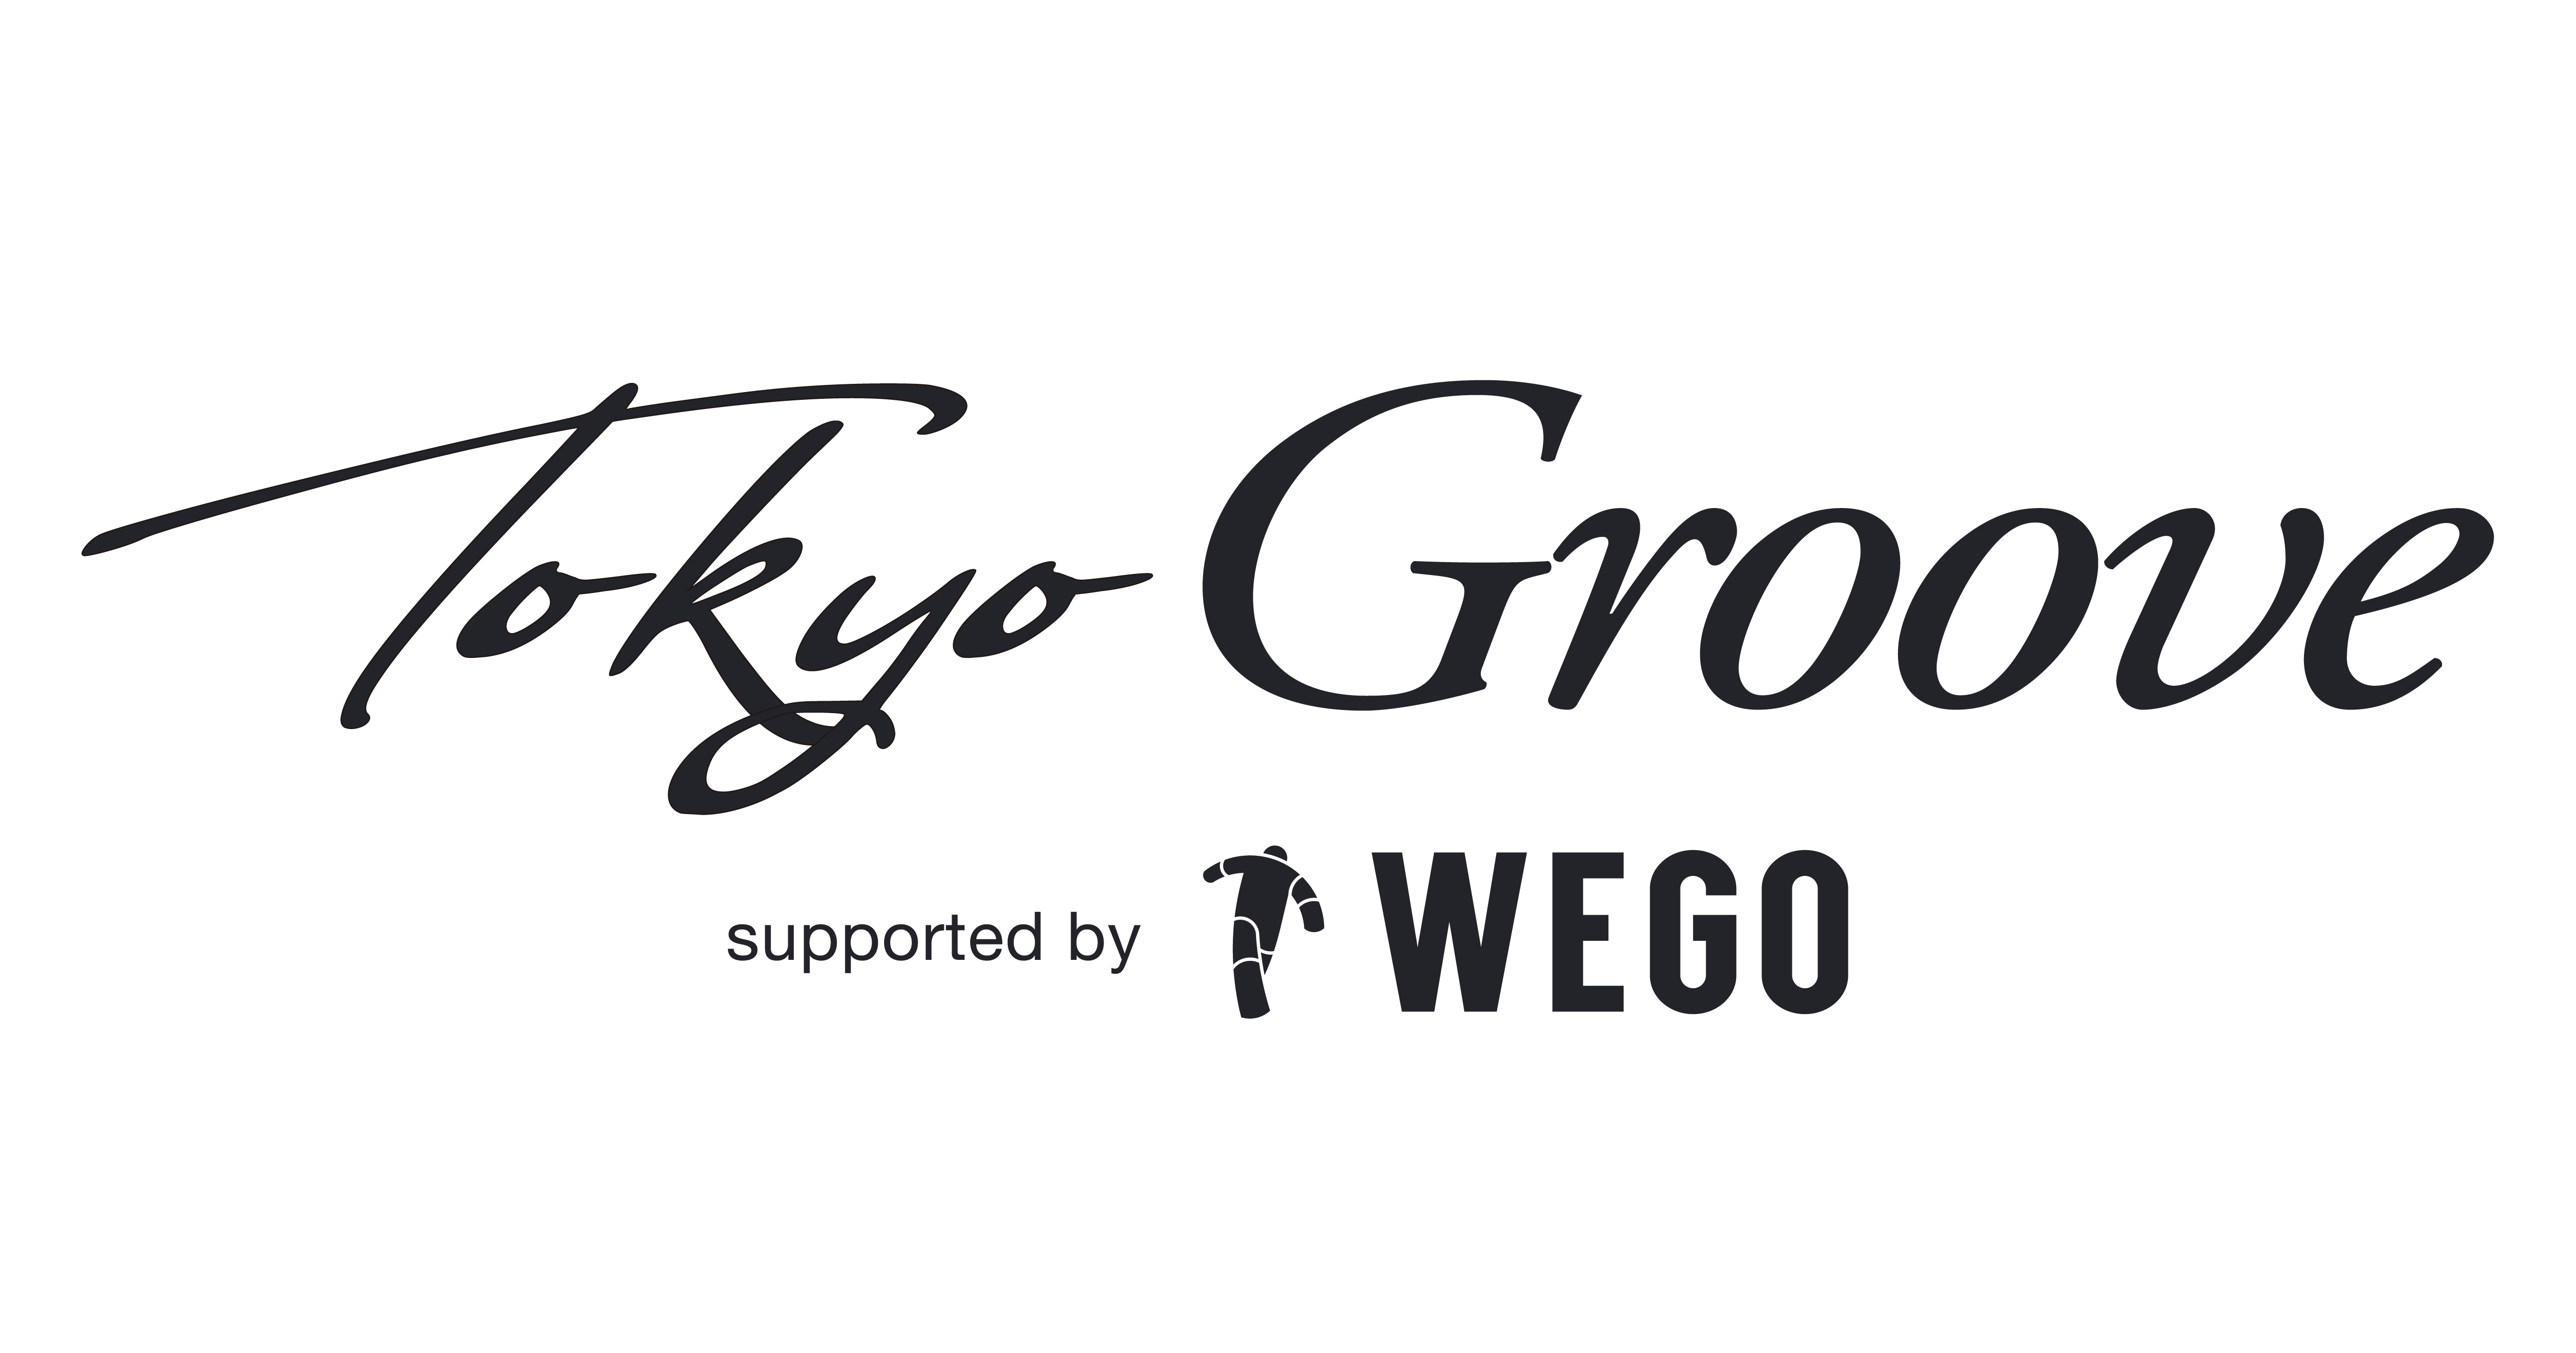 『"TokyoGroove" supported by WEGO』